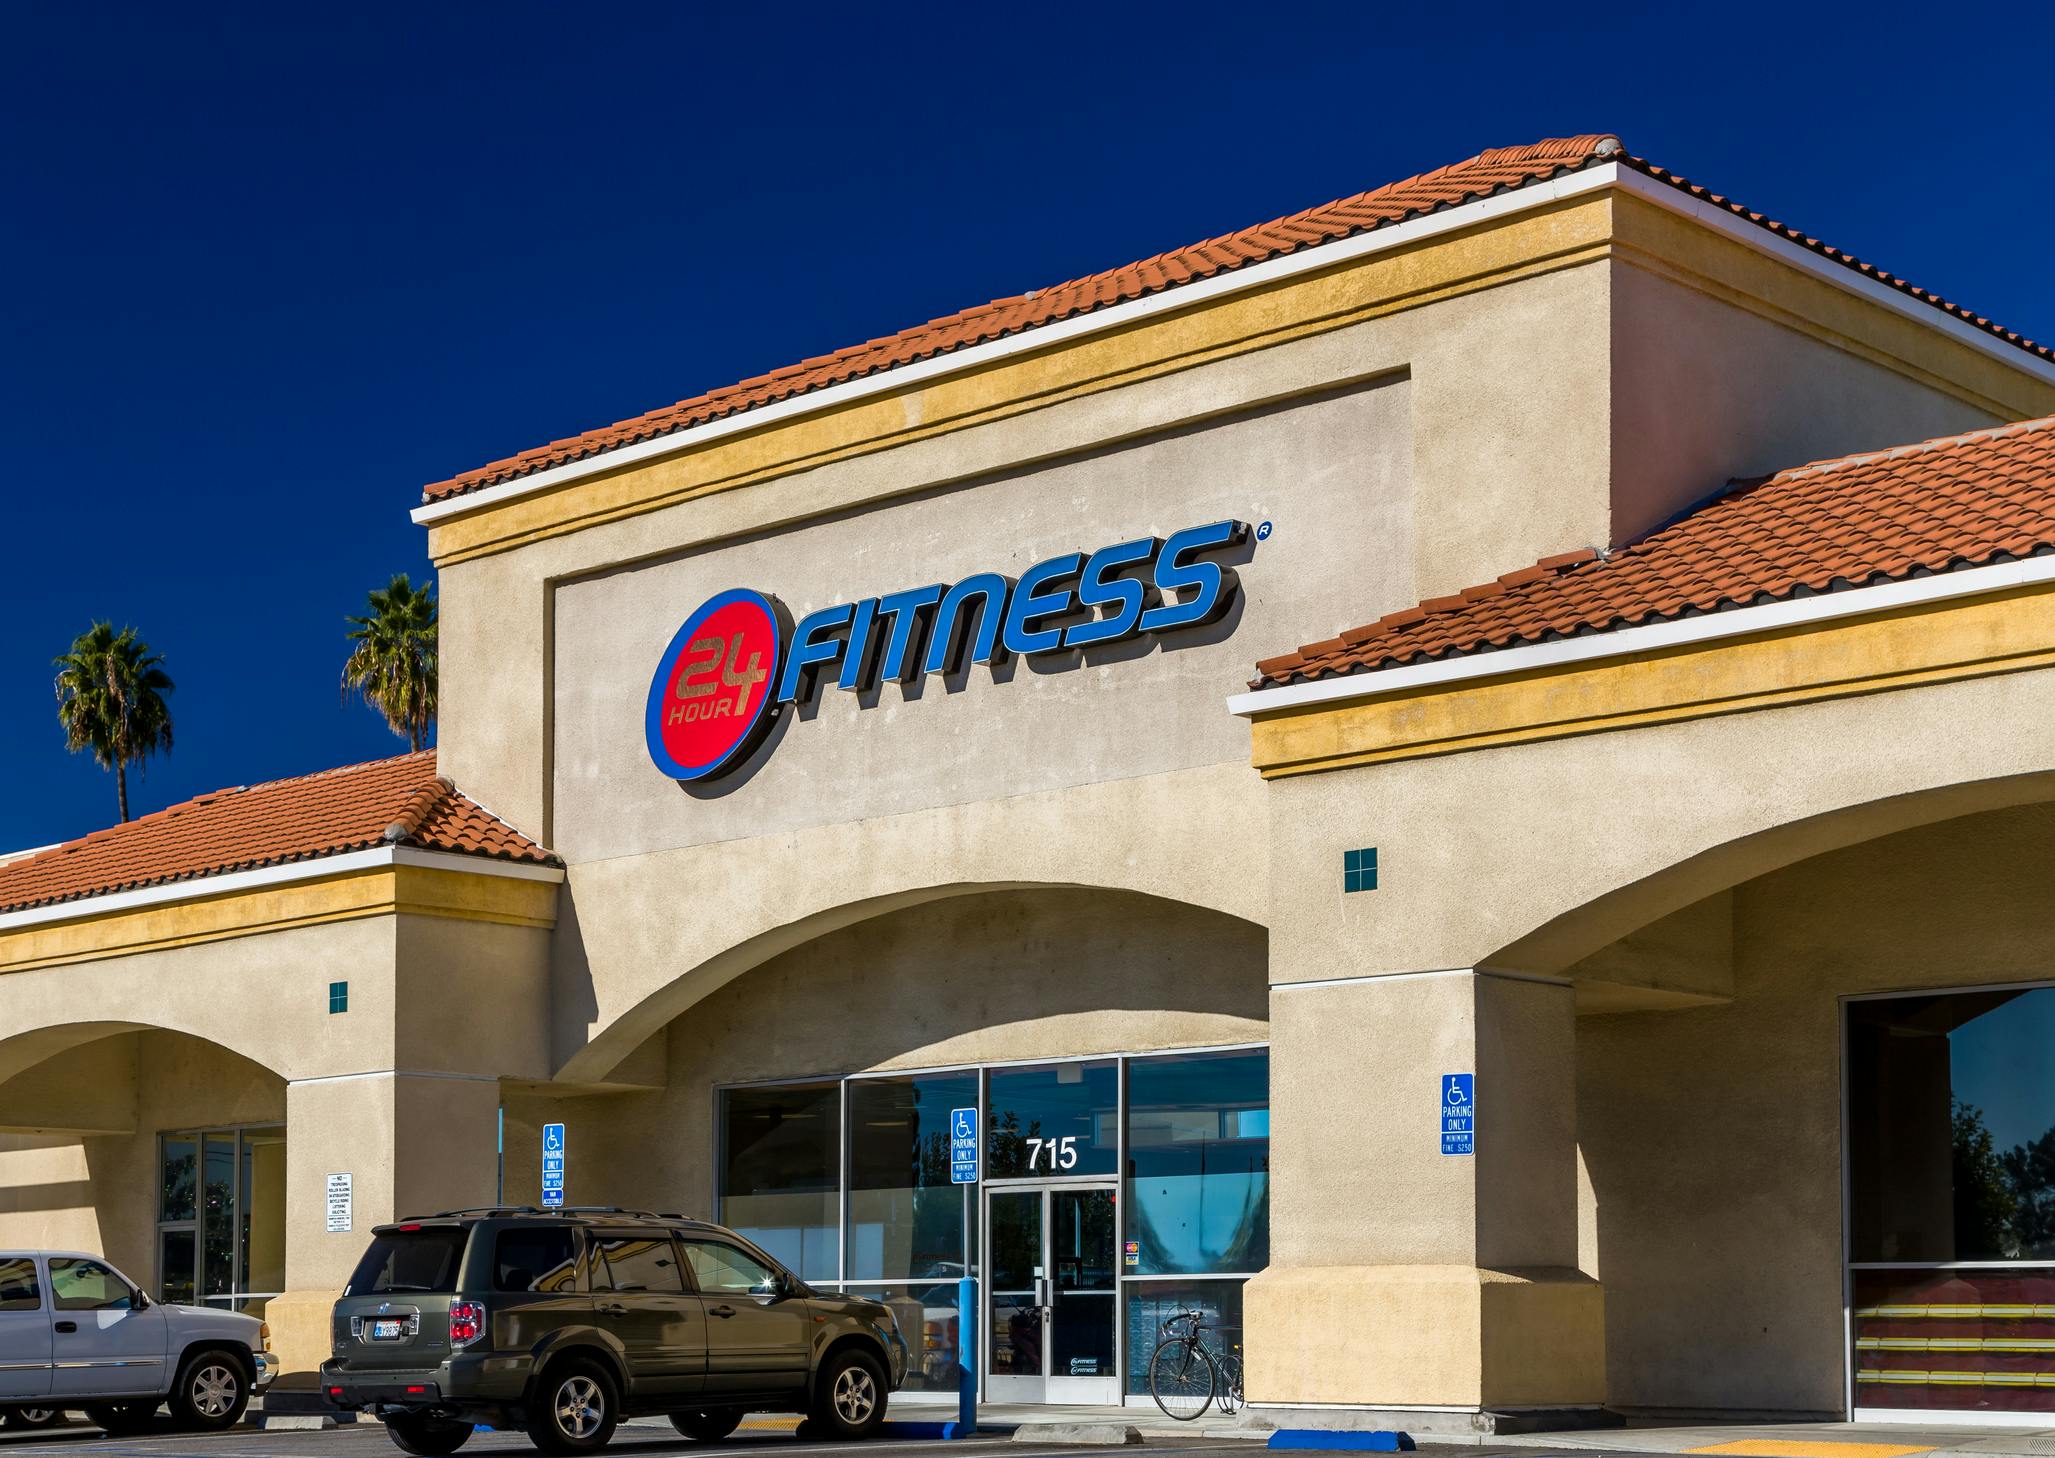 24 Hour Fitness Giving Out Perks During Bankruptcy